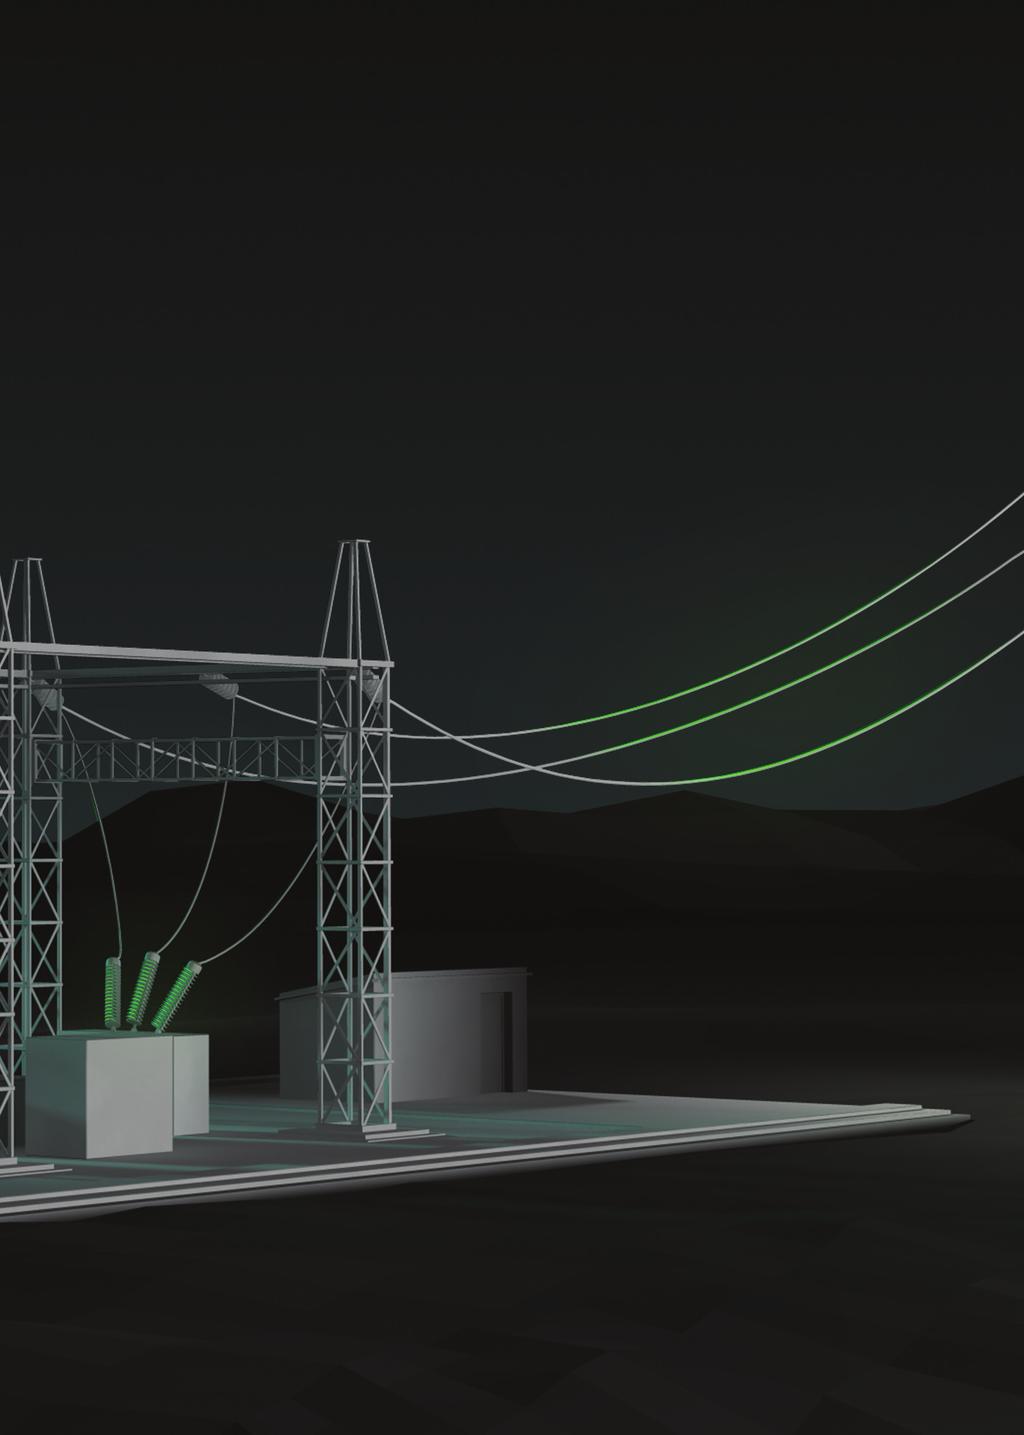 DO YOU HAVE THE POWER TO OPERATE YOUR GRID IN A SMARTER WAY?